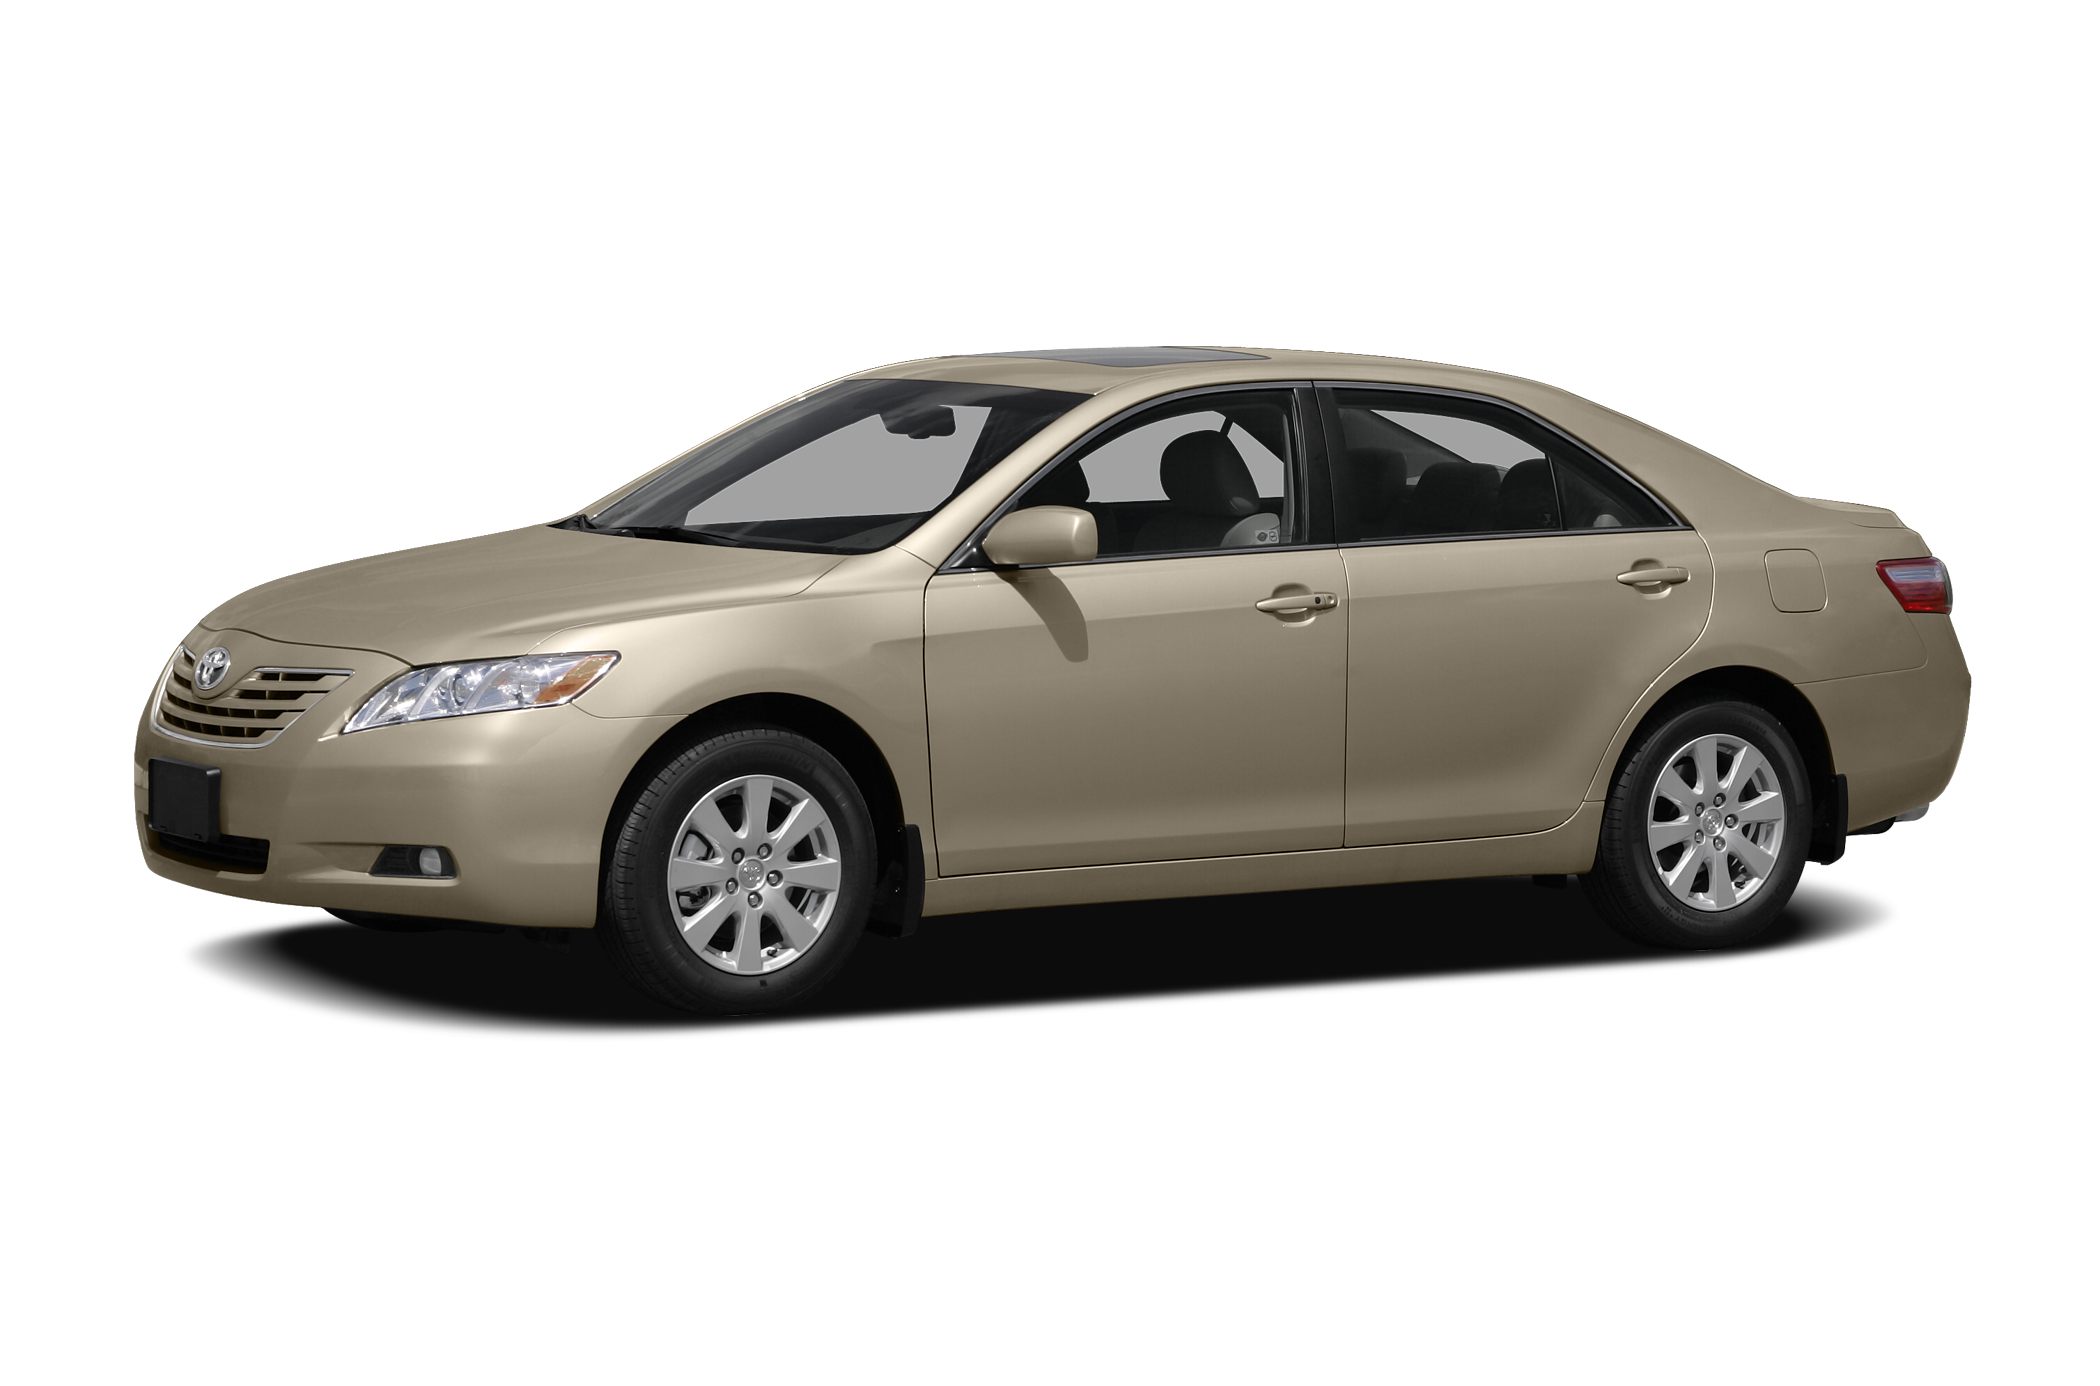 2009 Toyota Camry Le V6 4dr Sedan Pictures